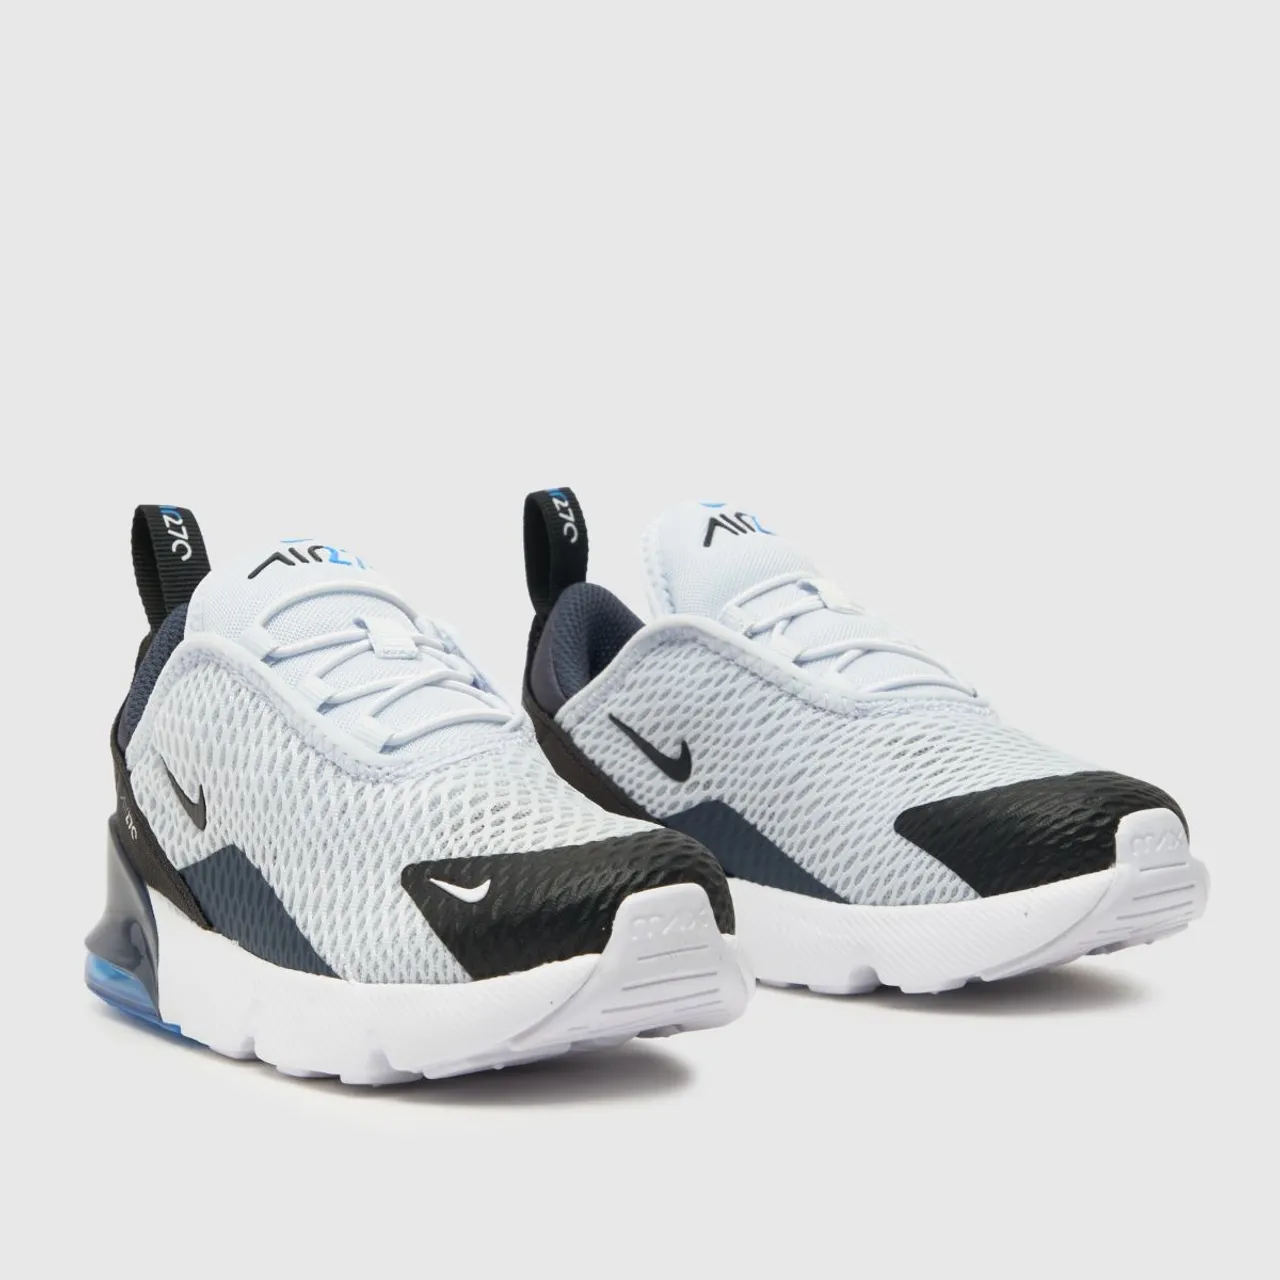 Nike Light Grey Air Max 270 Boys Toddler Trainers